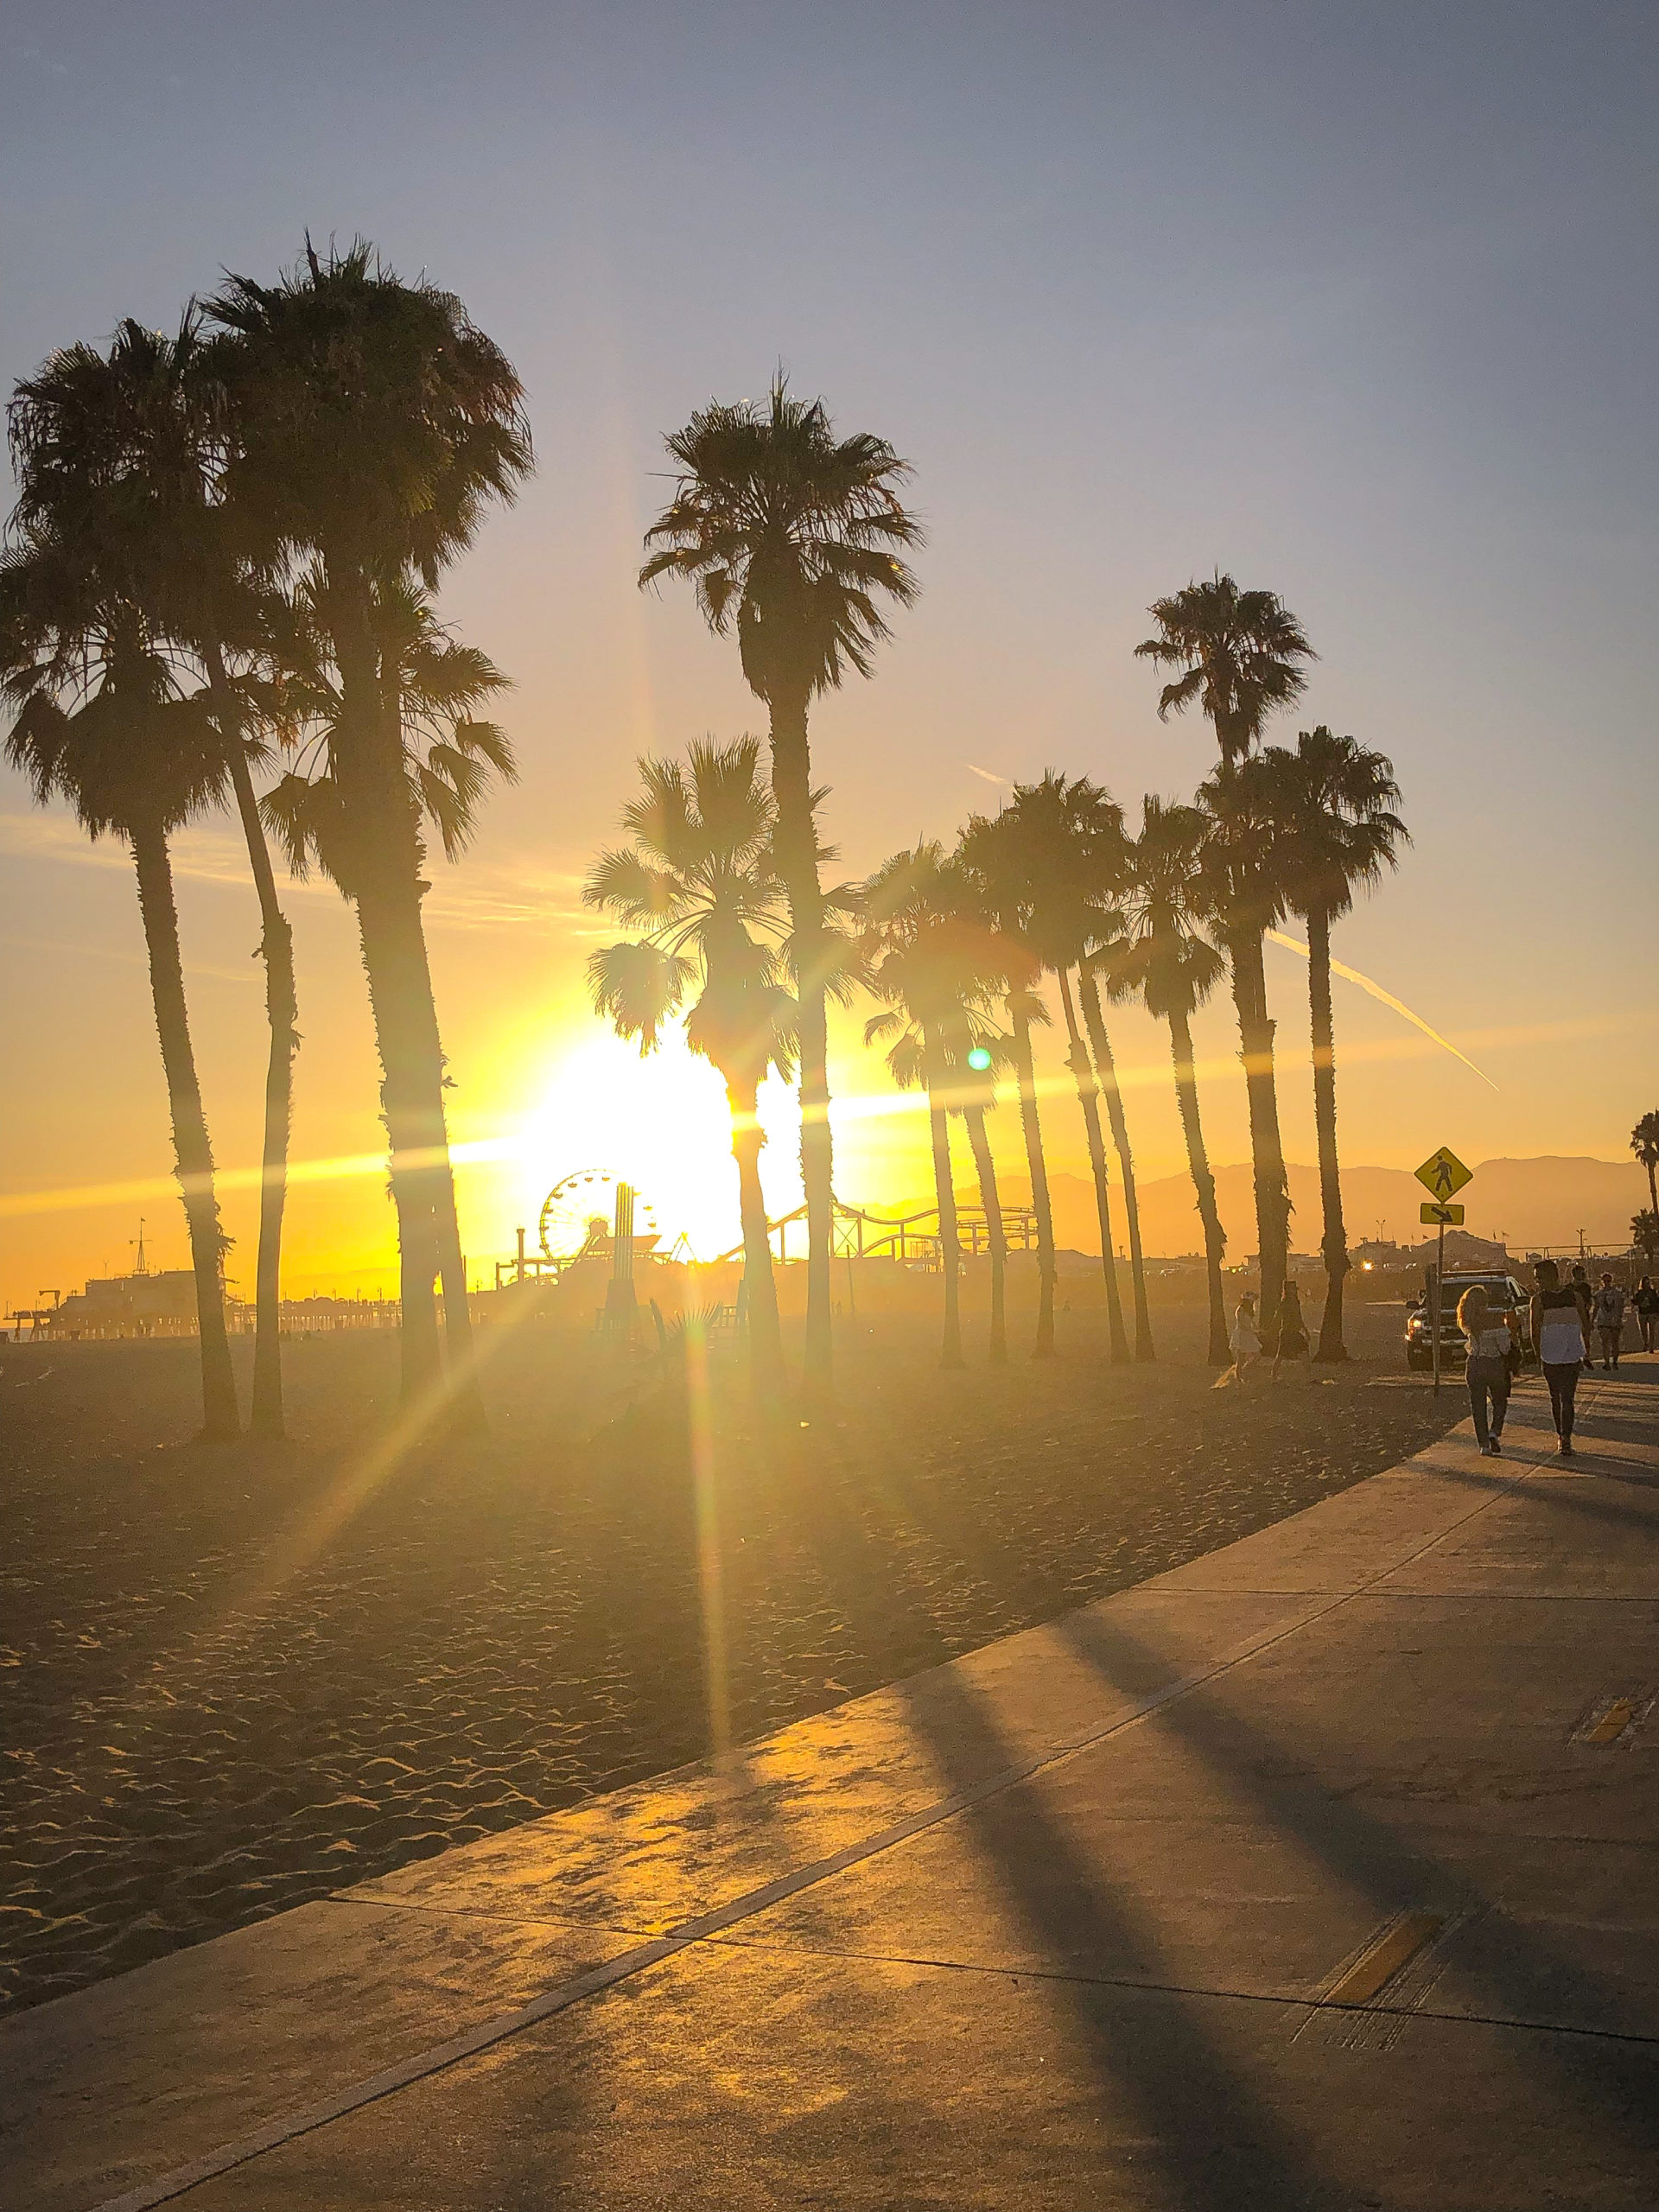 Palm trees in Santa Monica at sunset in Los Angeles